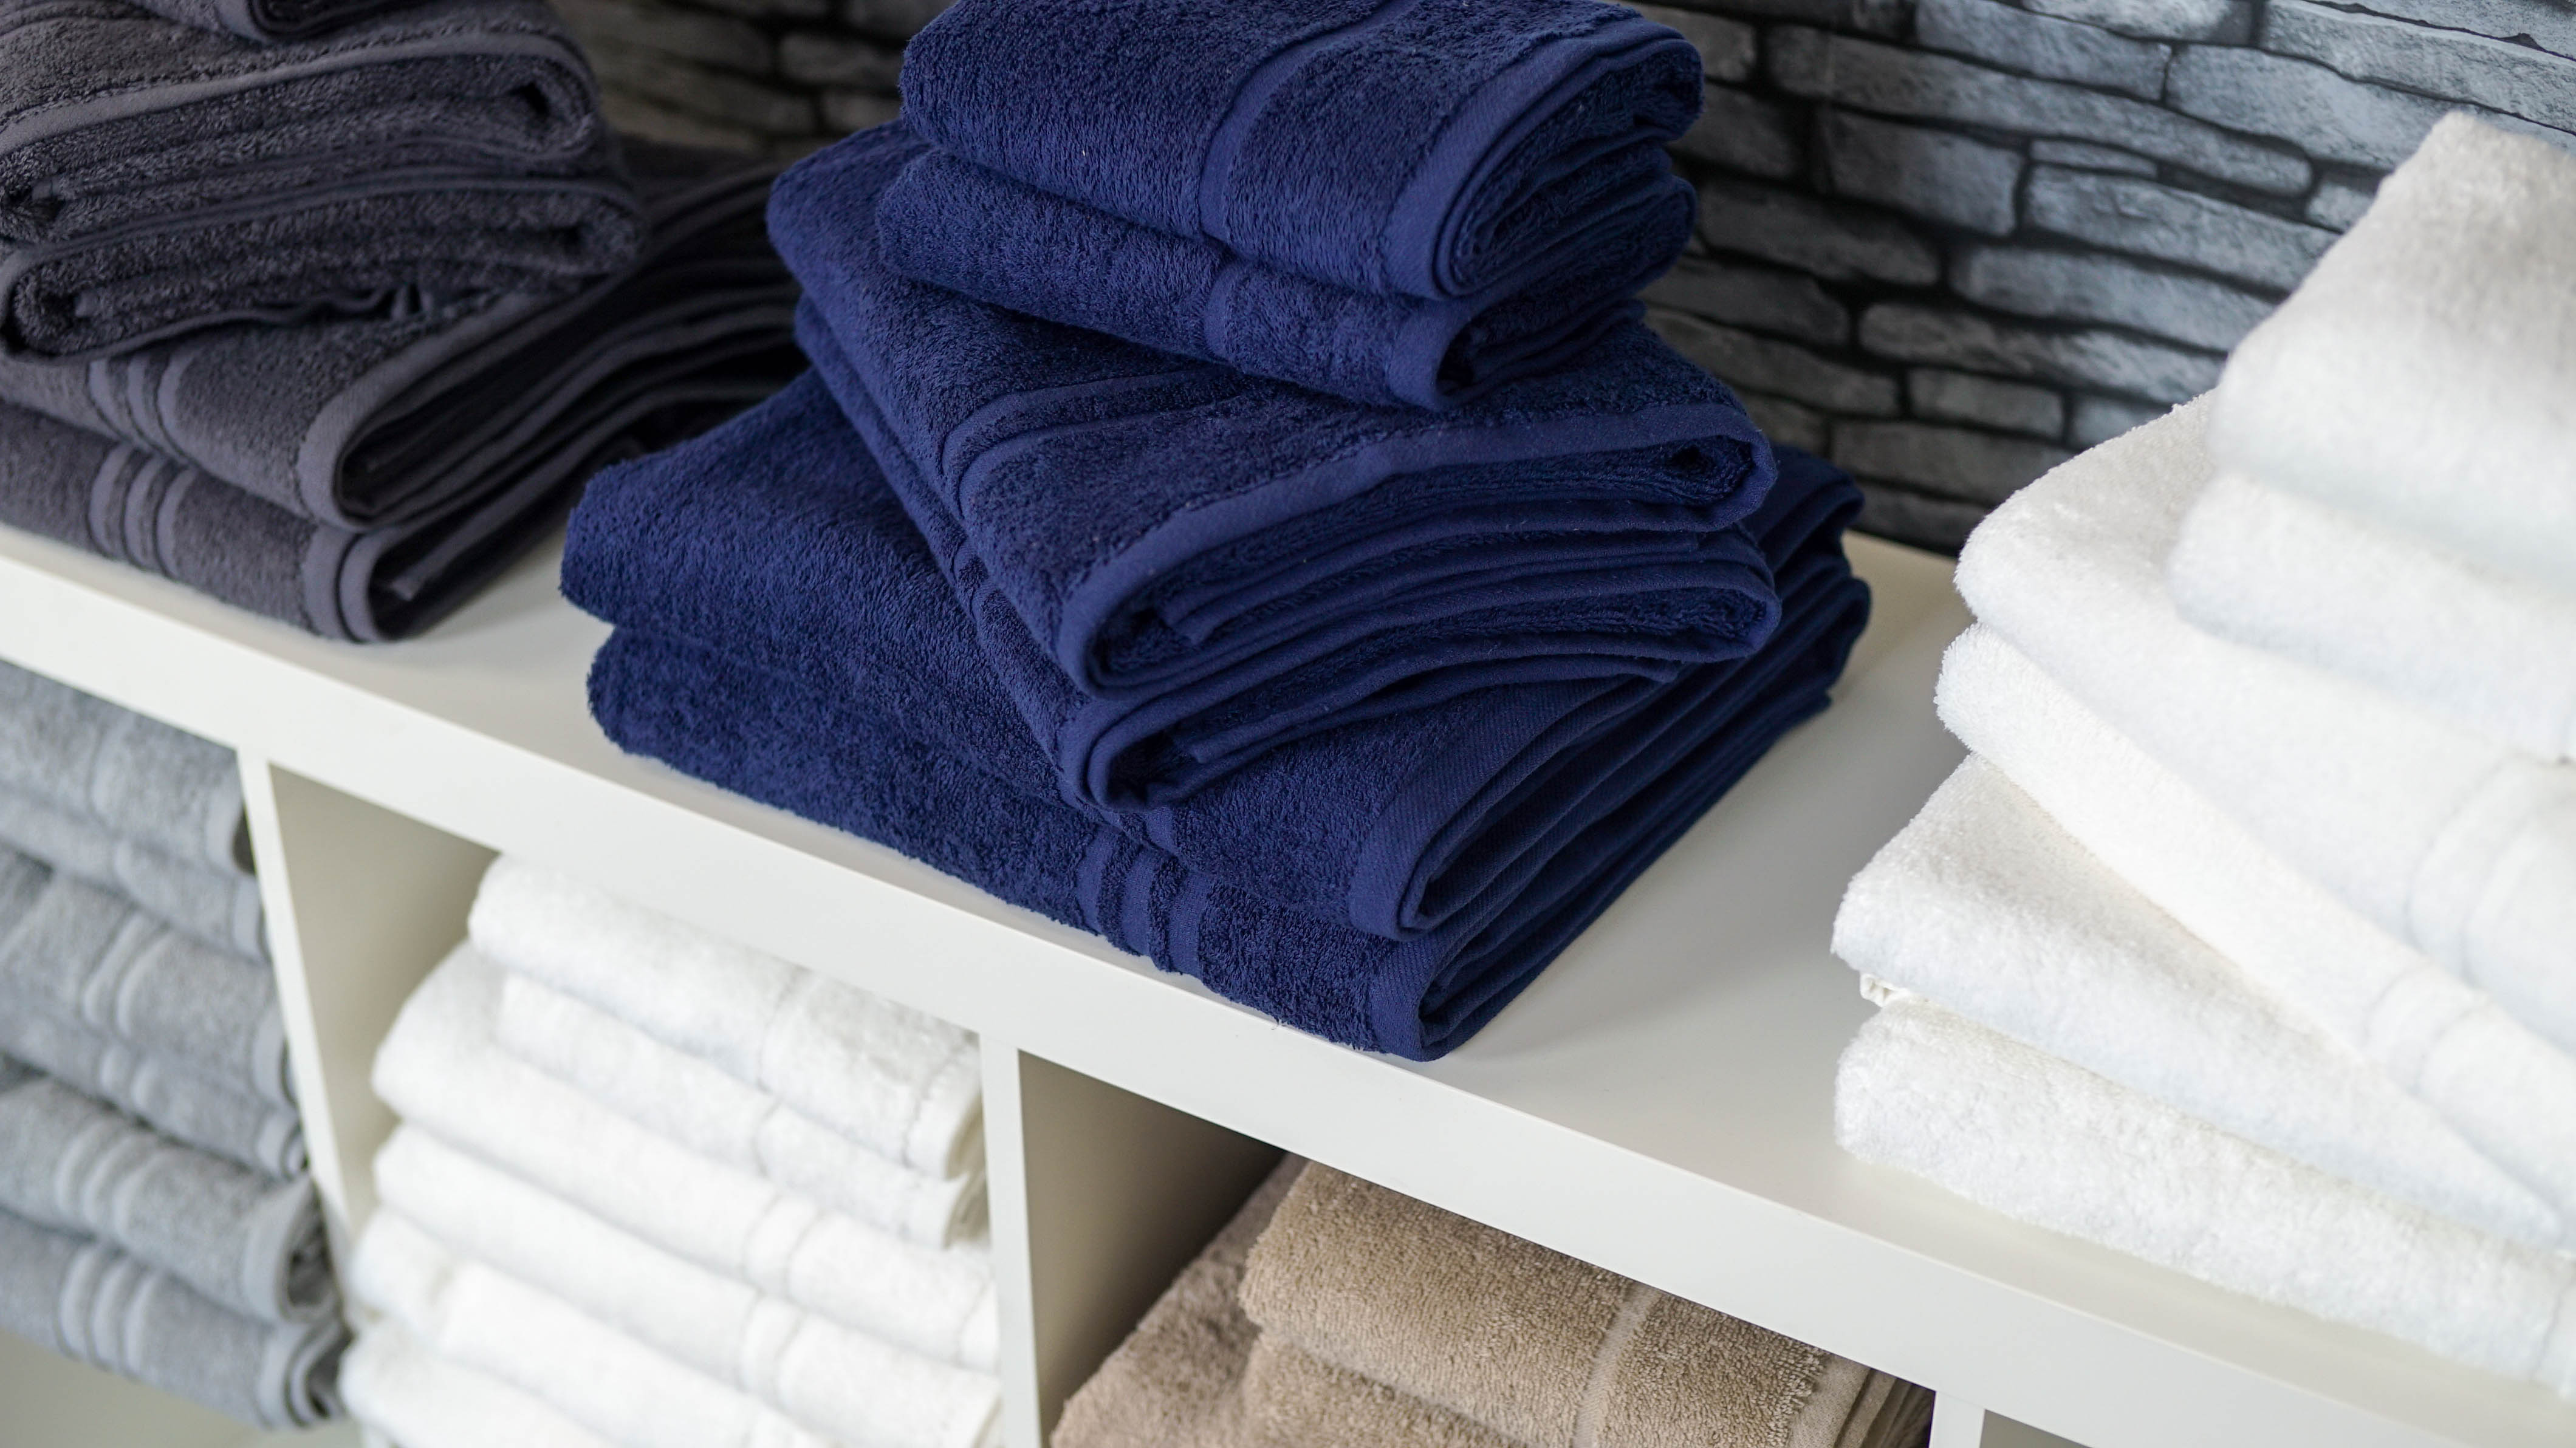 Allure Hotel Heavyweight Bath Towels 800gsm Thick and Absorbent Bathroom  Towels Made From 100% Natural Cotton 